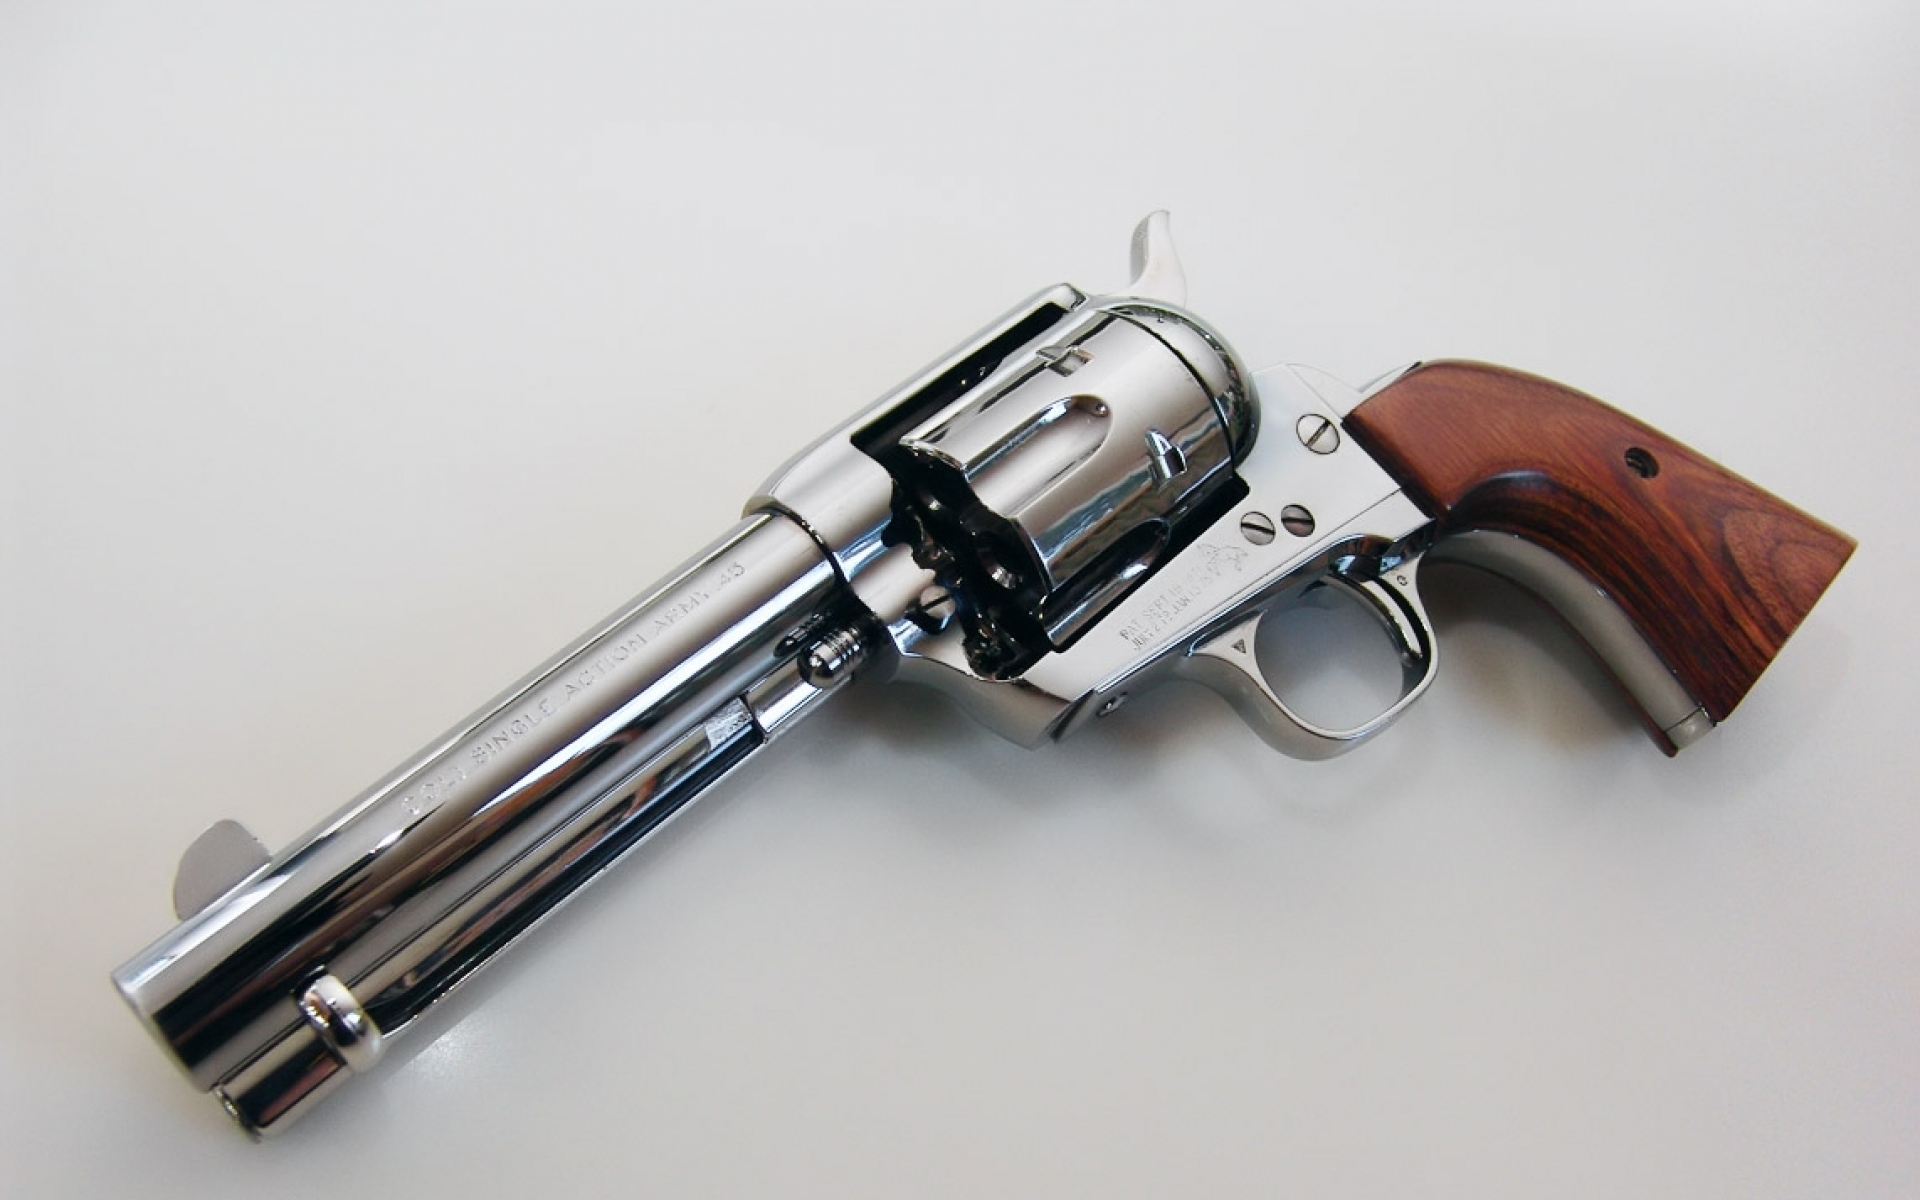 weapons, colt revolver